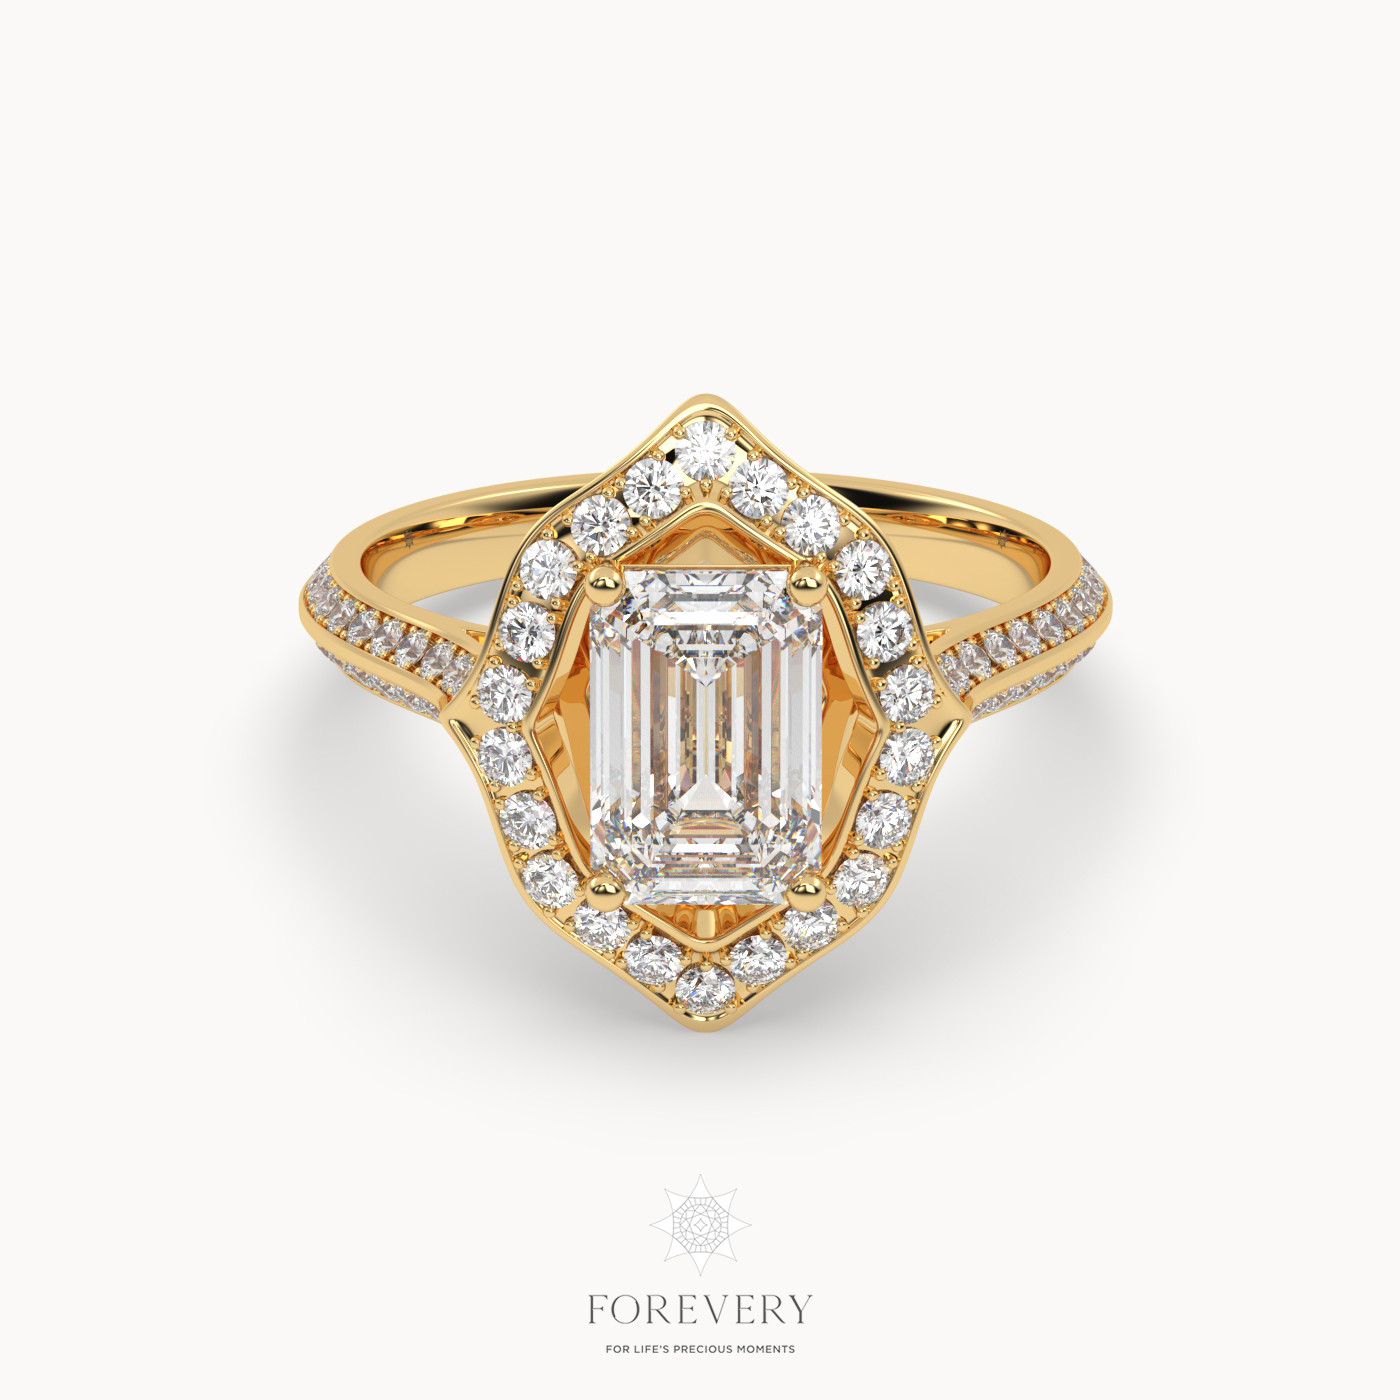 18K YELLOW GOLD Emerald Cut Unique Engagament Ring with Knife Edge Band